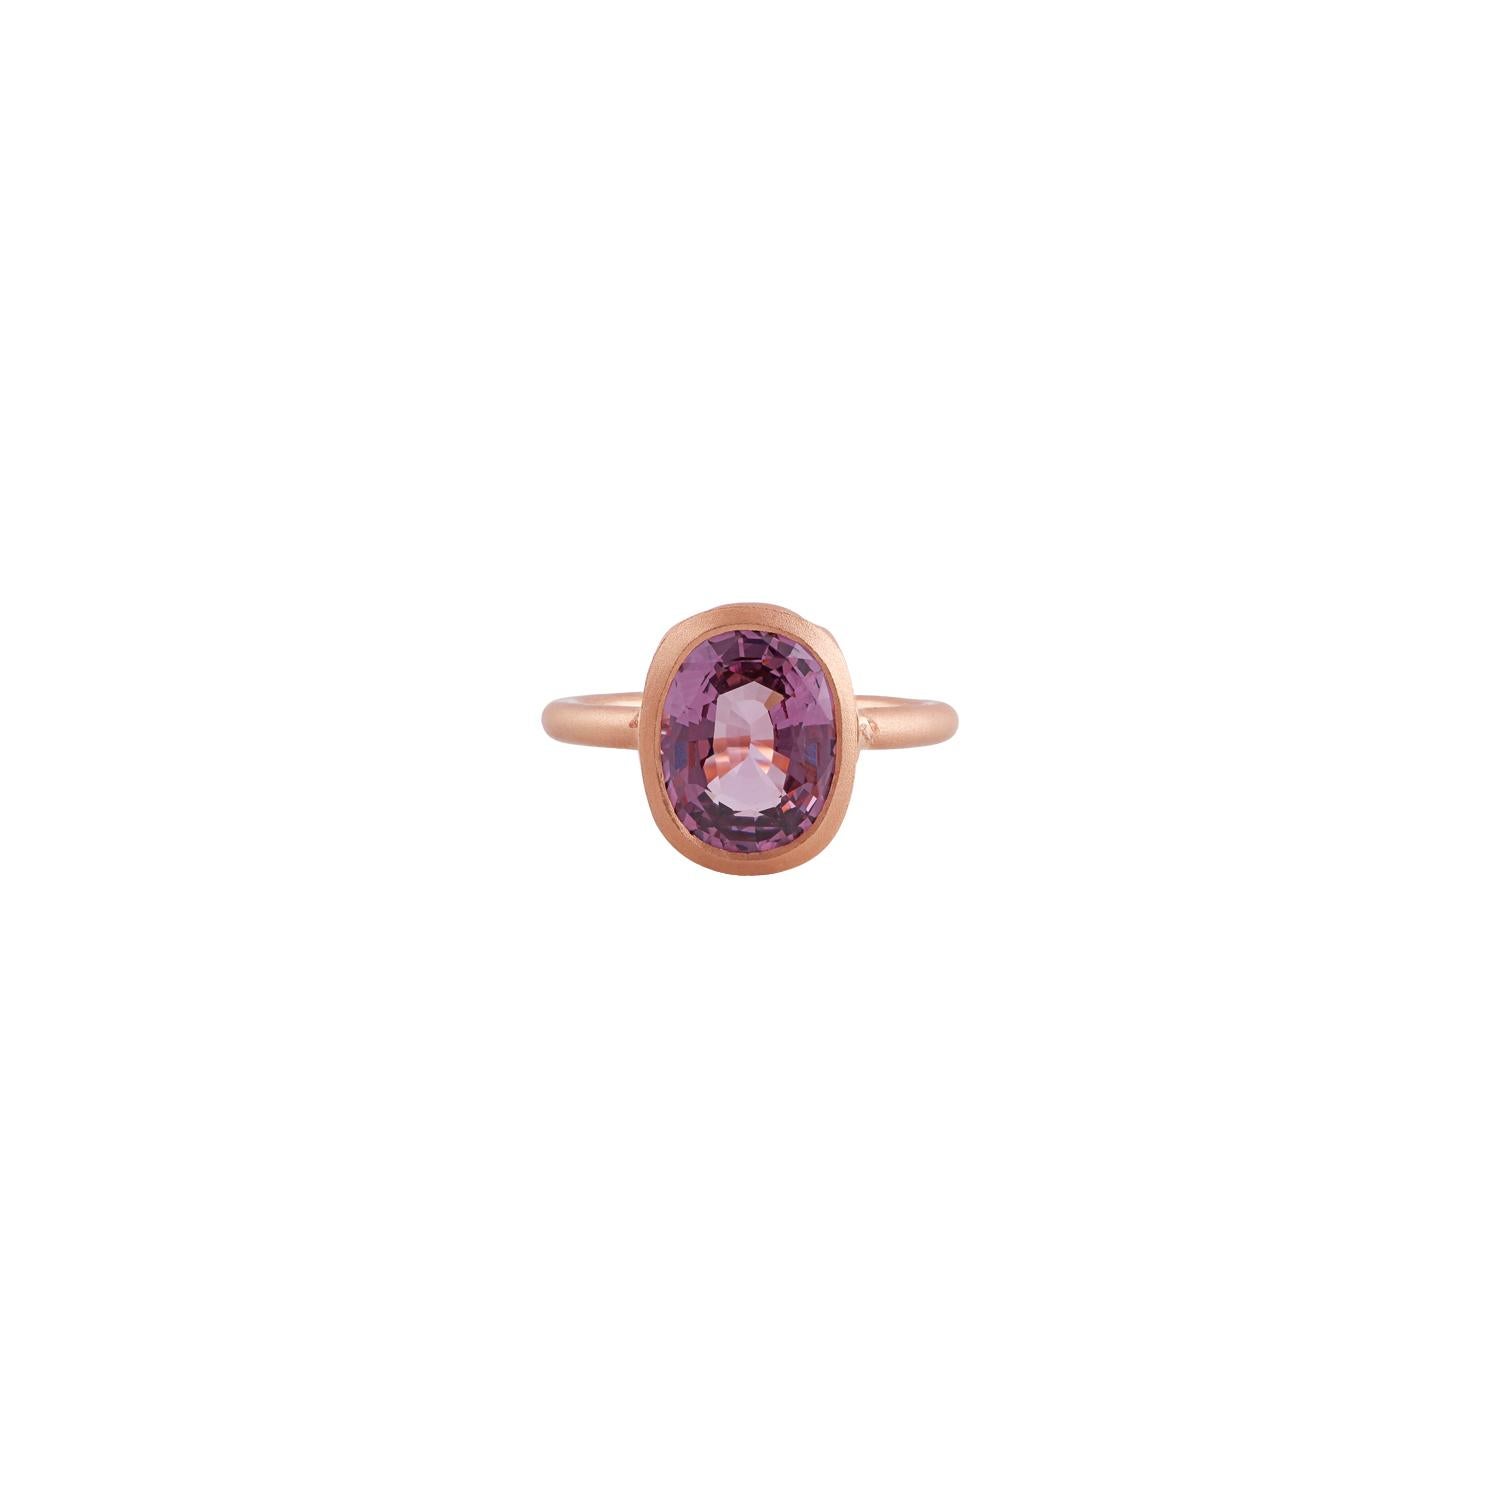 Sri Lanka Natural Spinel & Diamond Surrounded By Matte Finish 18k Rose Gold Ring


Diamond - 0.28 CTS
 Sri Lanka Natural Spinel  - 4.92 CTS

Matte Finish 18k Gold

Custom Services
Resizing is available.
Request Customization

size - 6.5

THIS RING